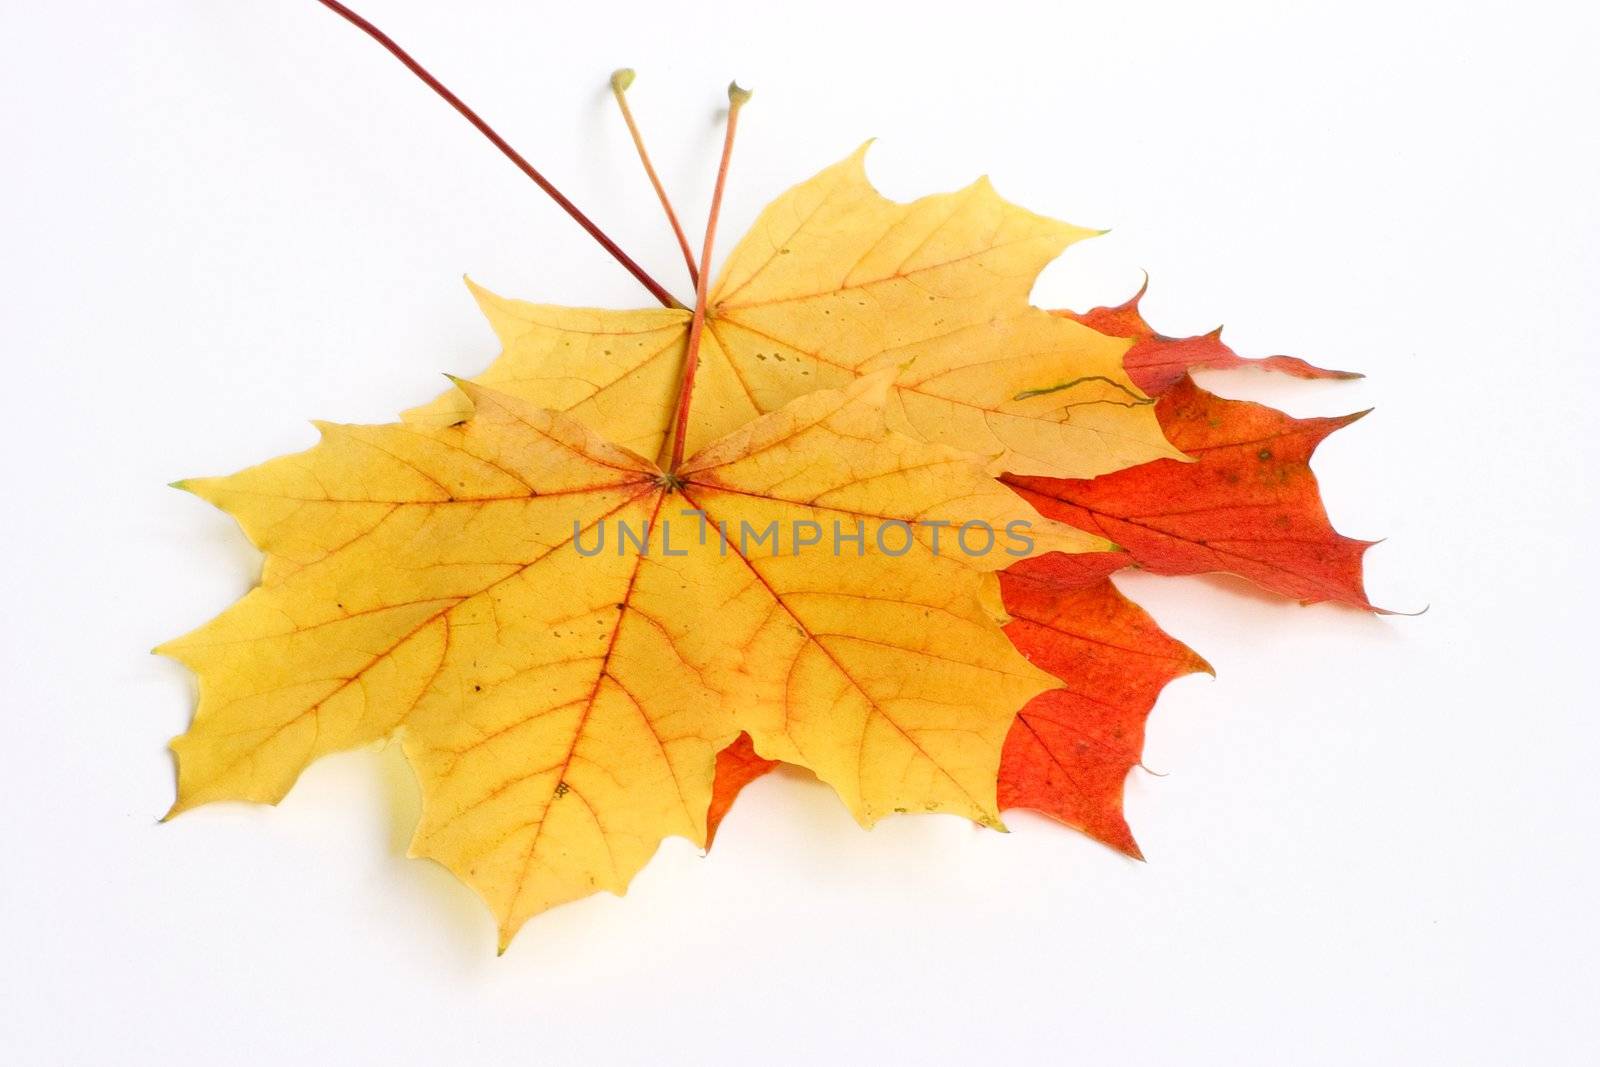 Fallen leaves isolated on white background.